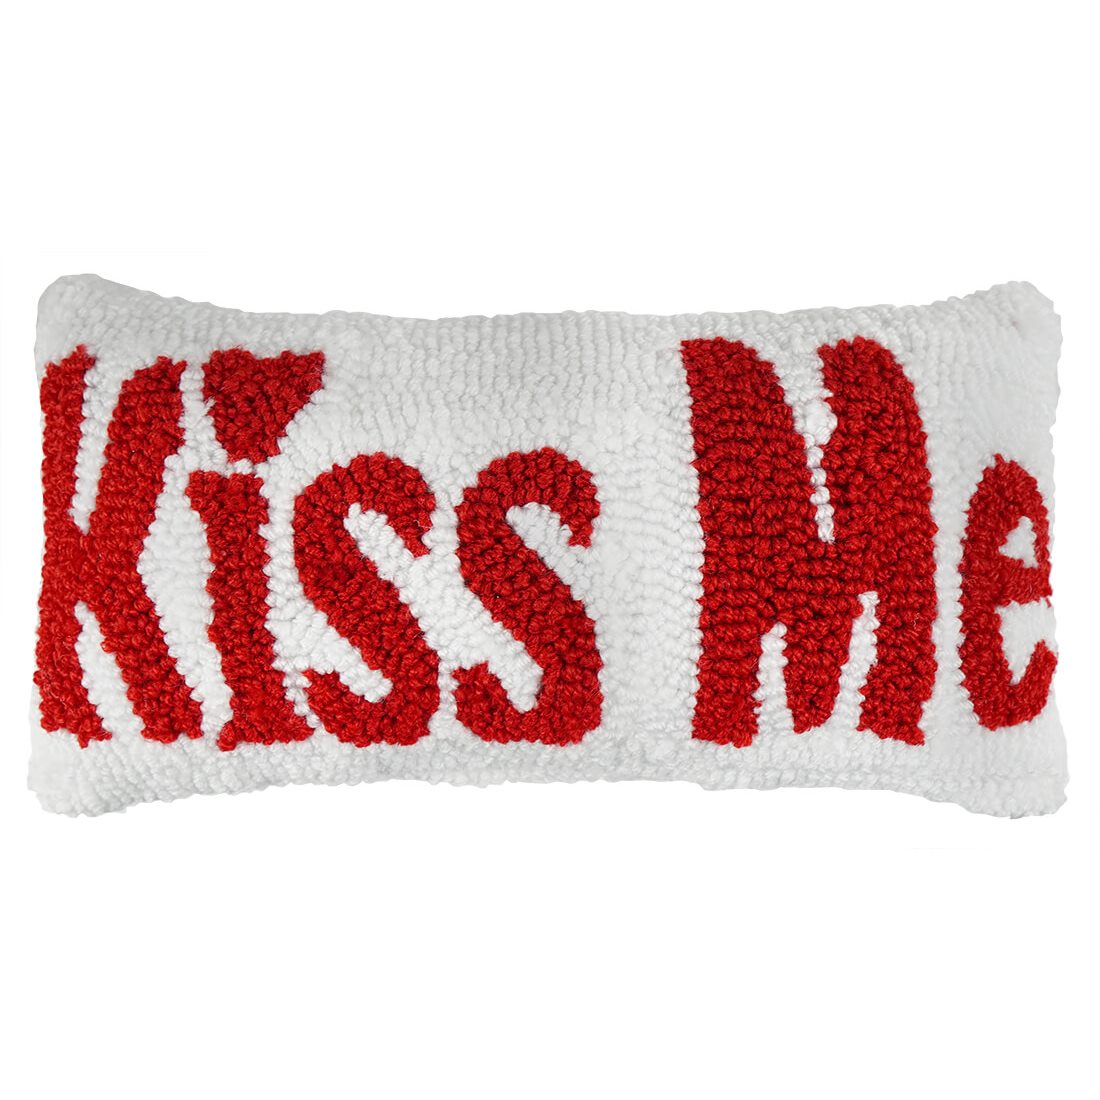 Hooked Kiss Me Pillow